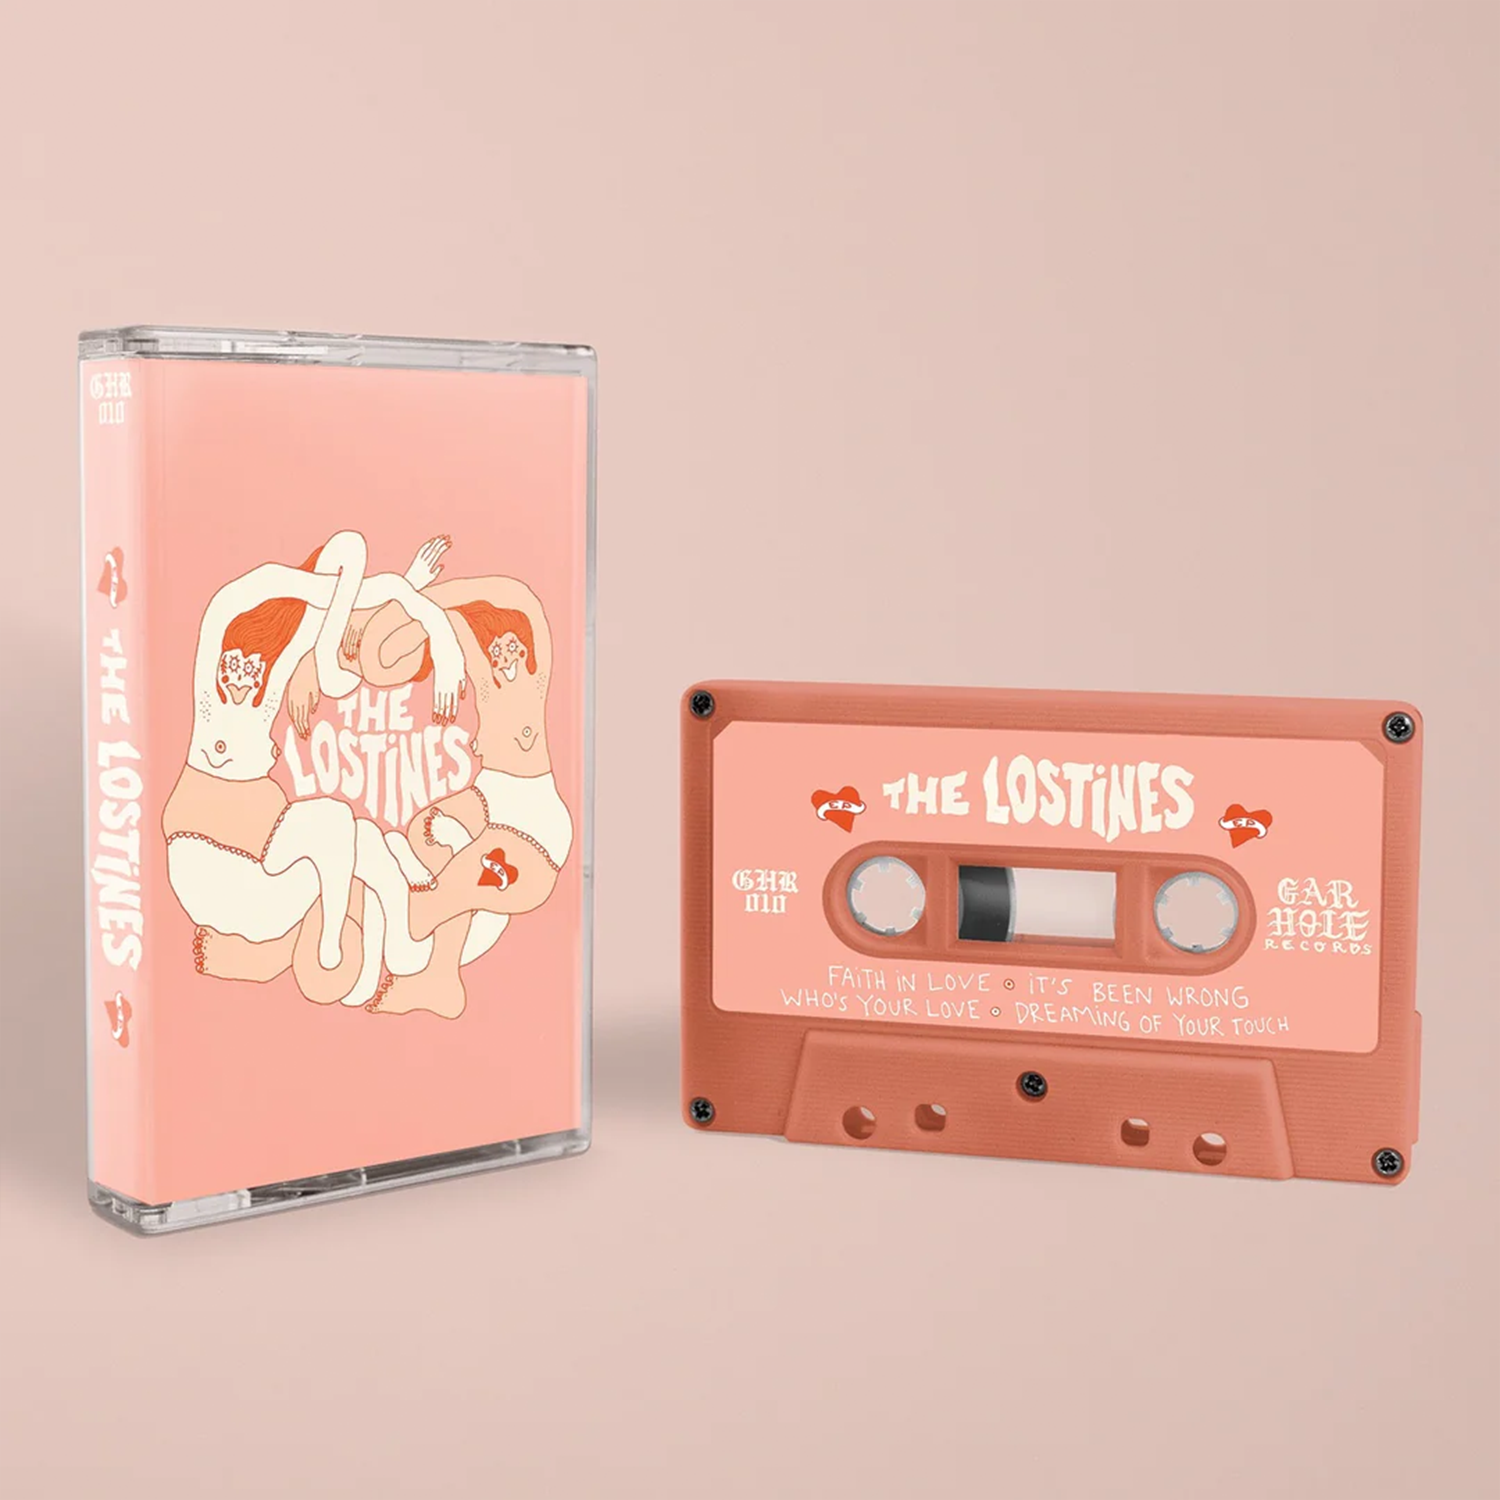 The Lostines - "The Lostines EP" Cassette